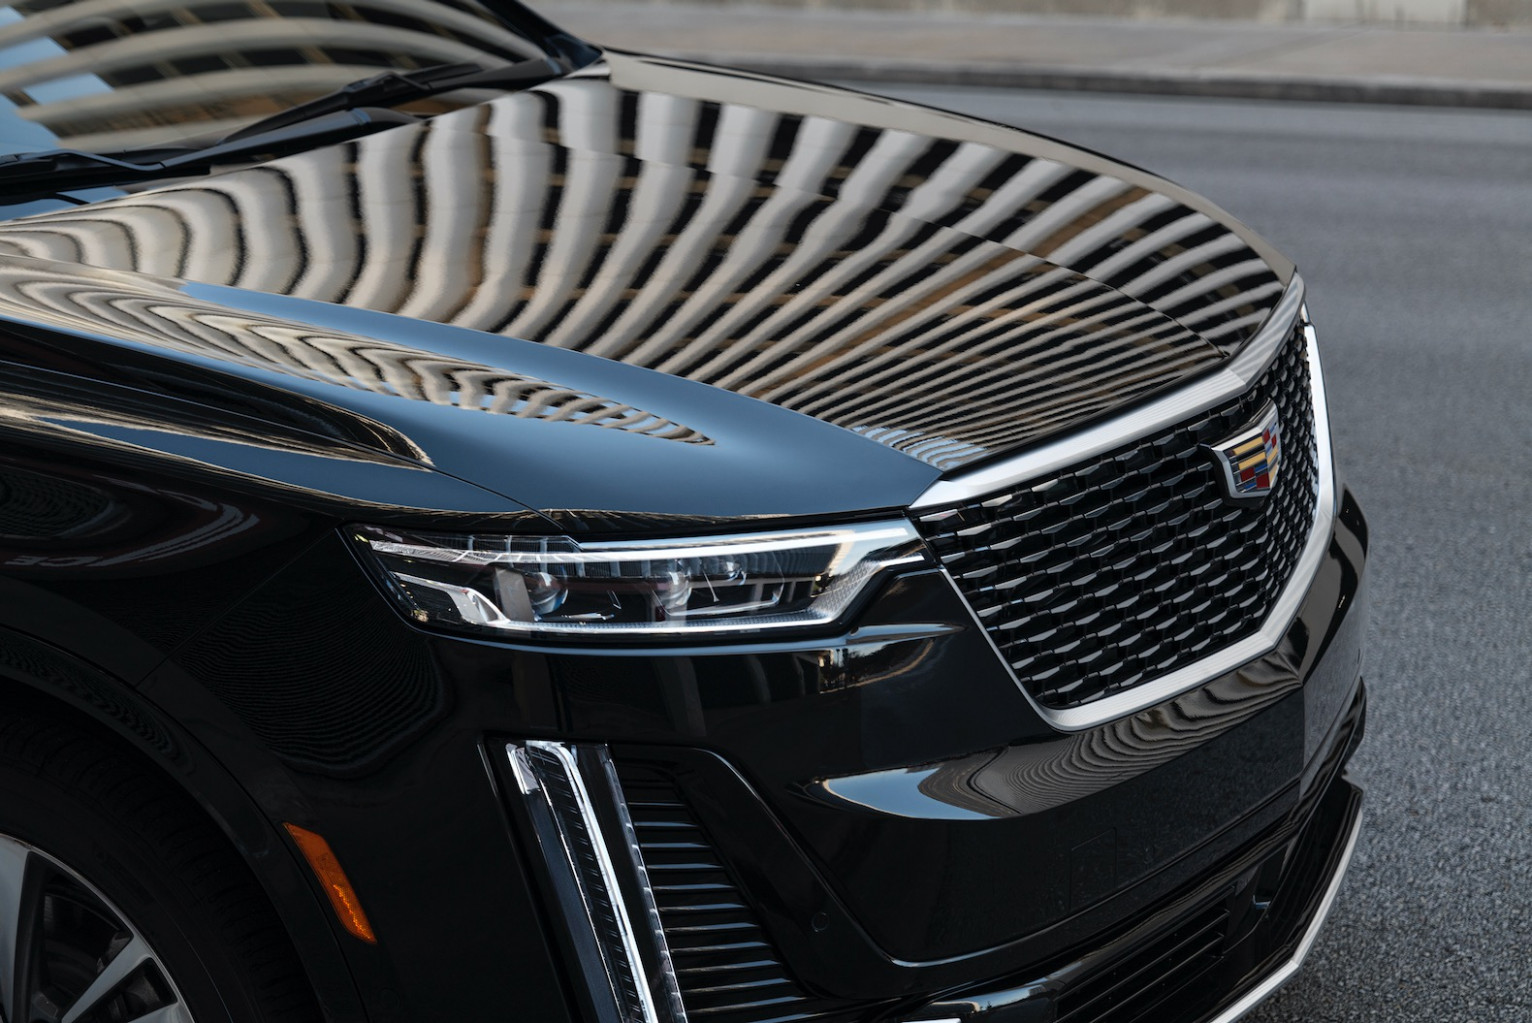 Redesign and Concept 2022 Cadillac Xt6 Release Date